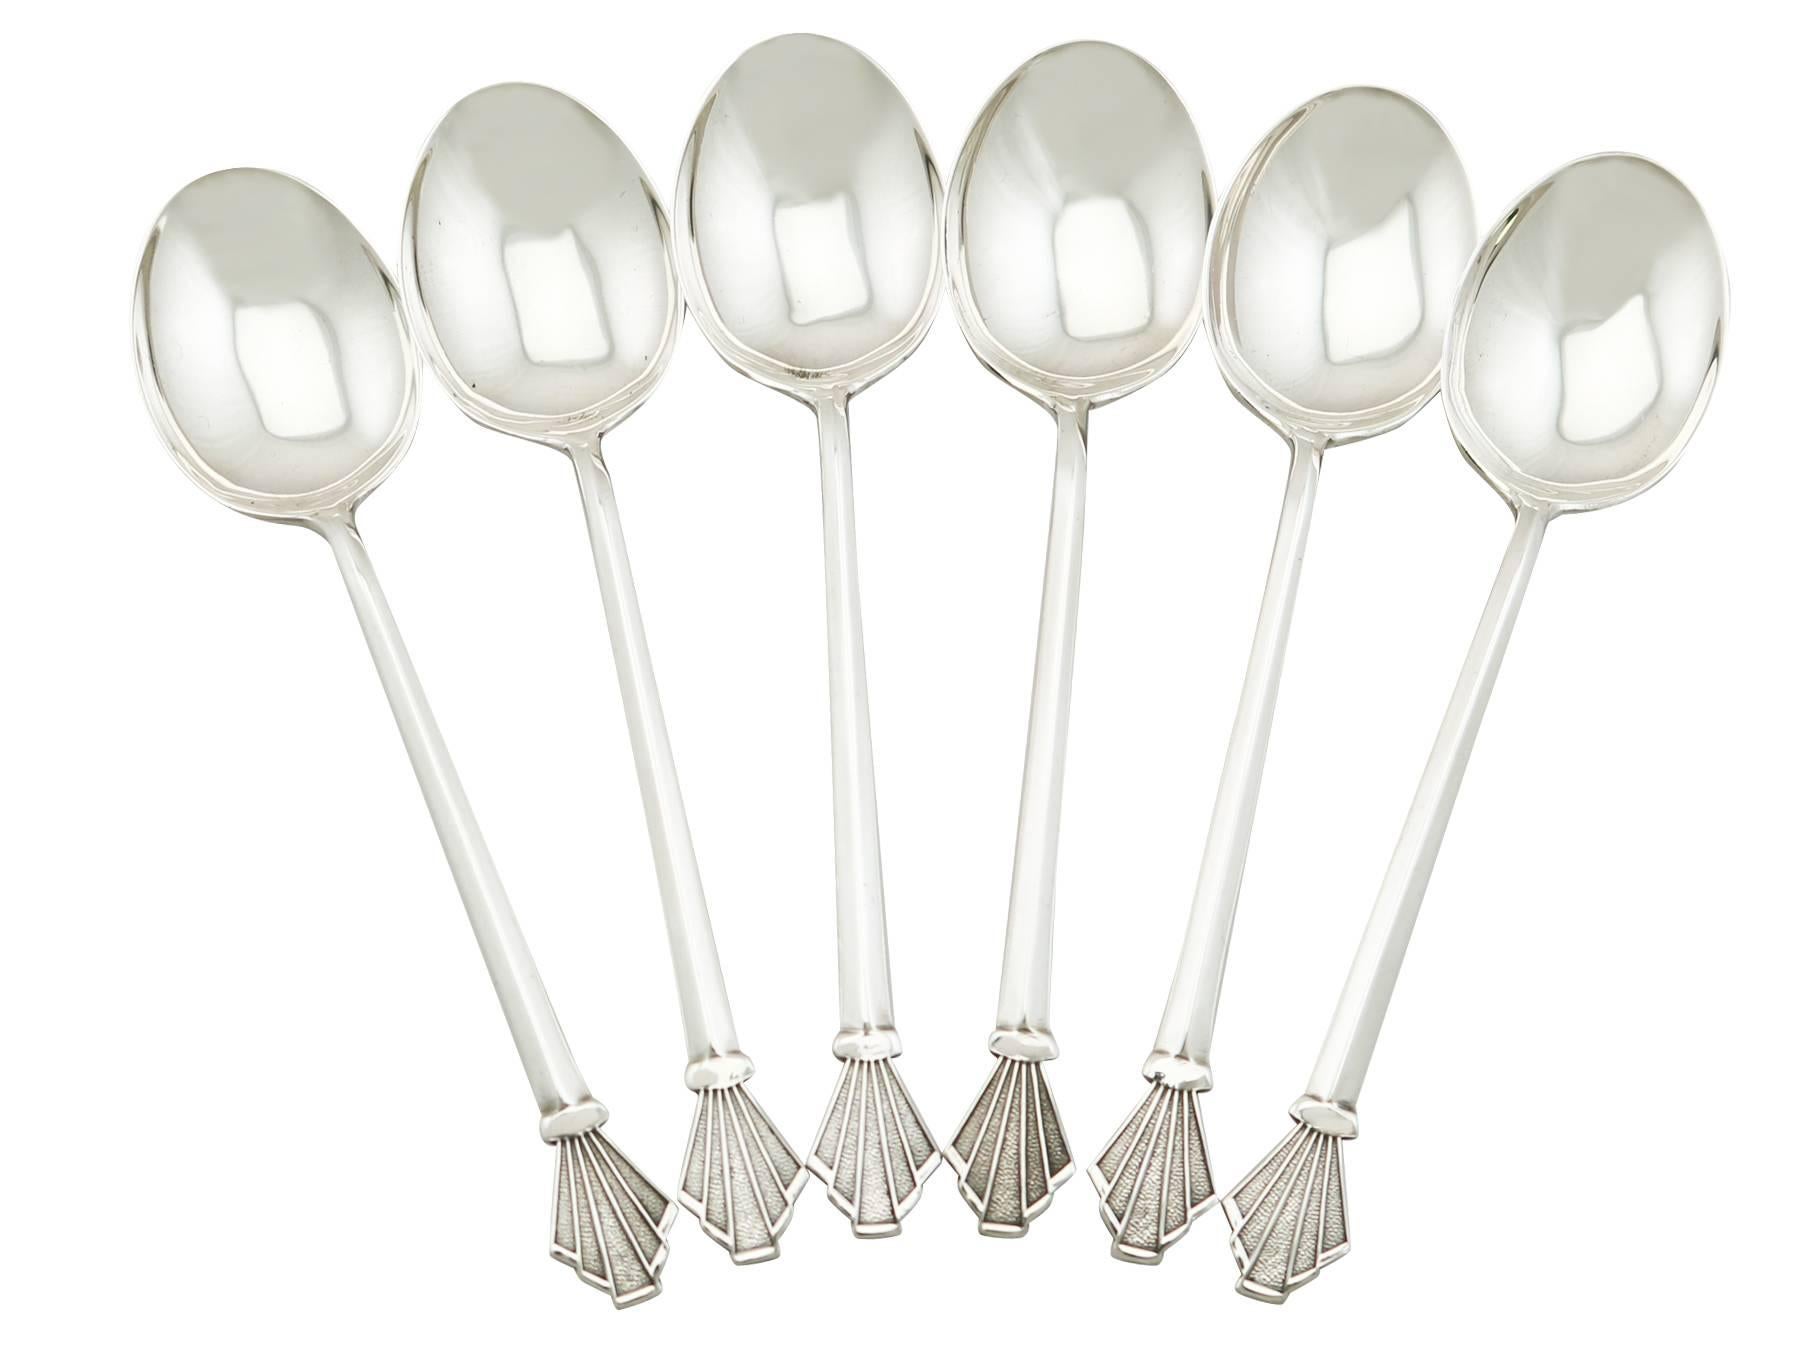 An exceptional, fine and impressive set of six antique George V English sterling silver tea / coffee spoons made by Liberty & Co Ltd, in the Art Deco style - boxed; part of our collectable silverware collection.

These exceptional antique George V